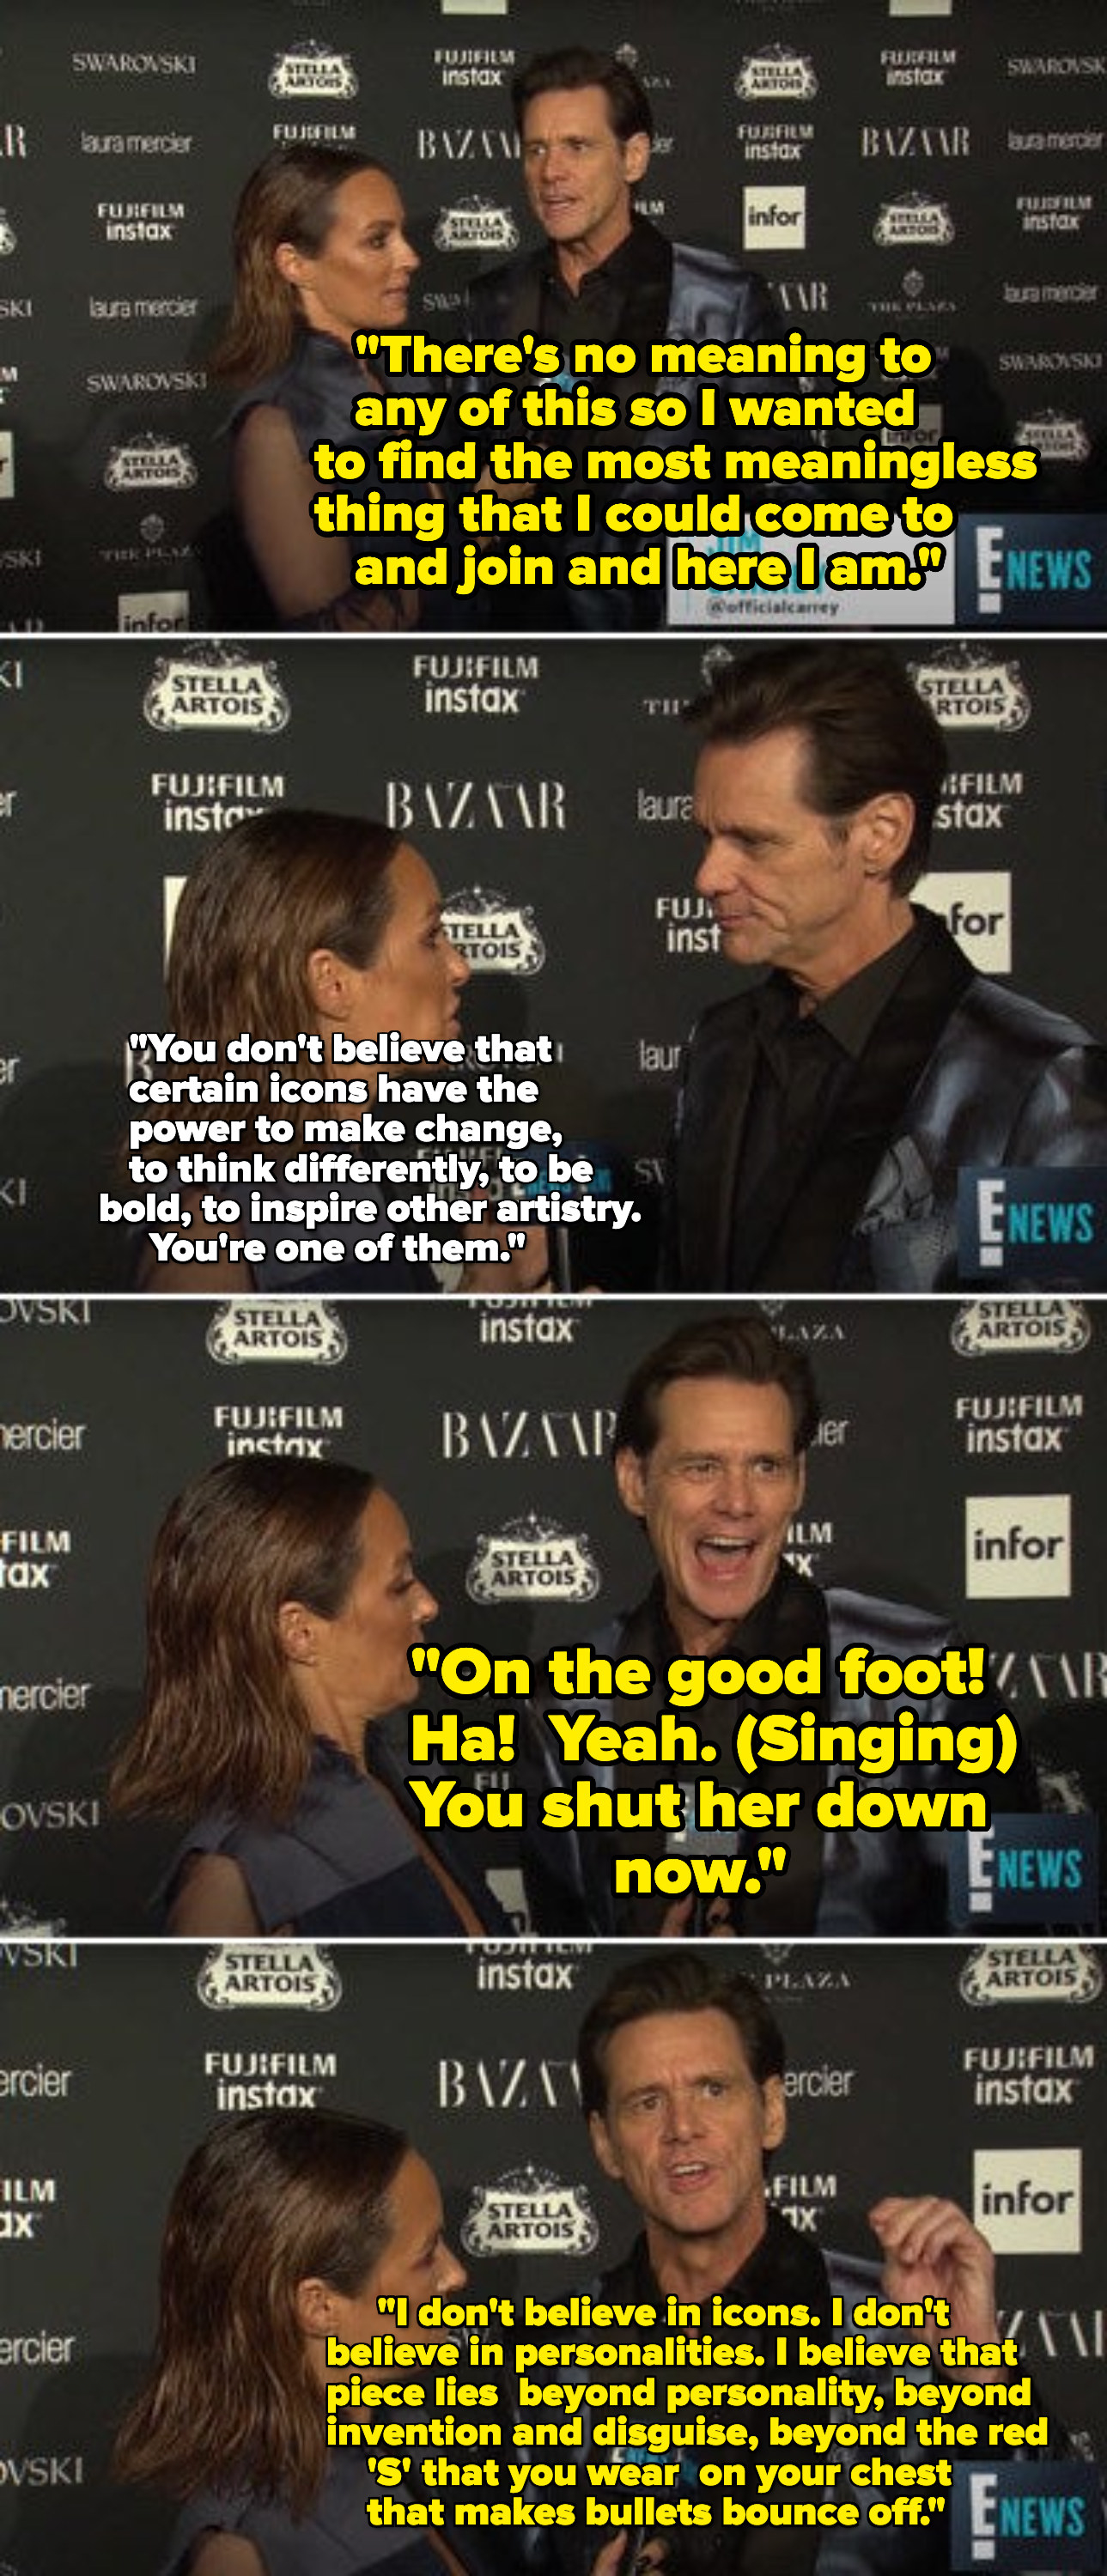 Jim Carrey using a lot of words to say he thinks Fashion Week is meaningless and he doesn&#x27;t believe in icons